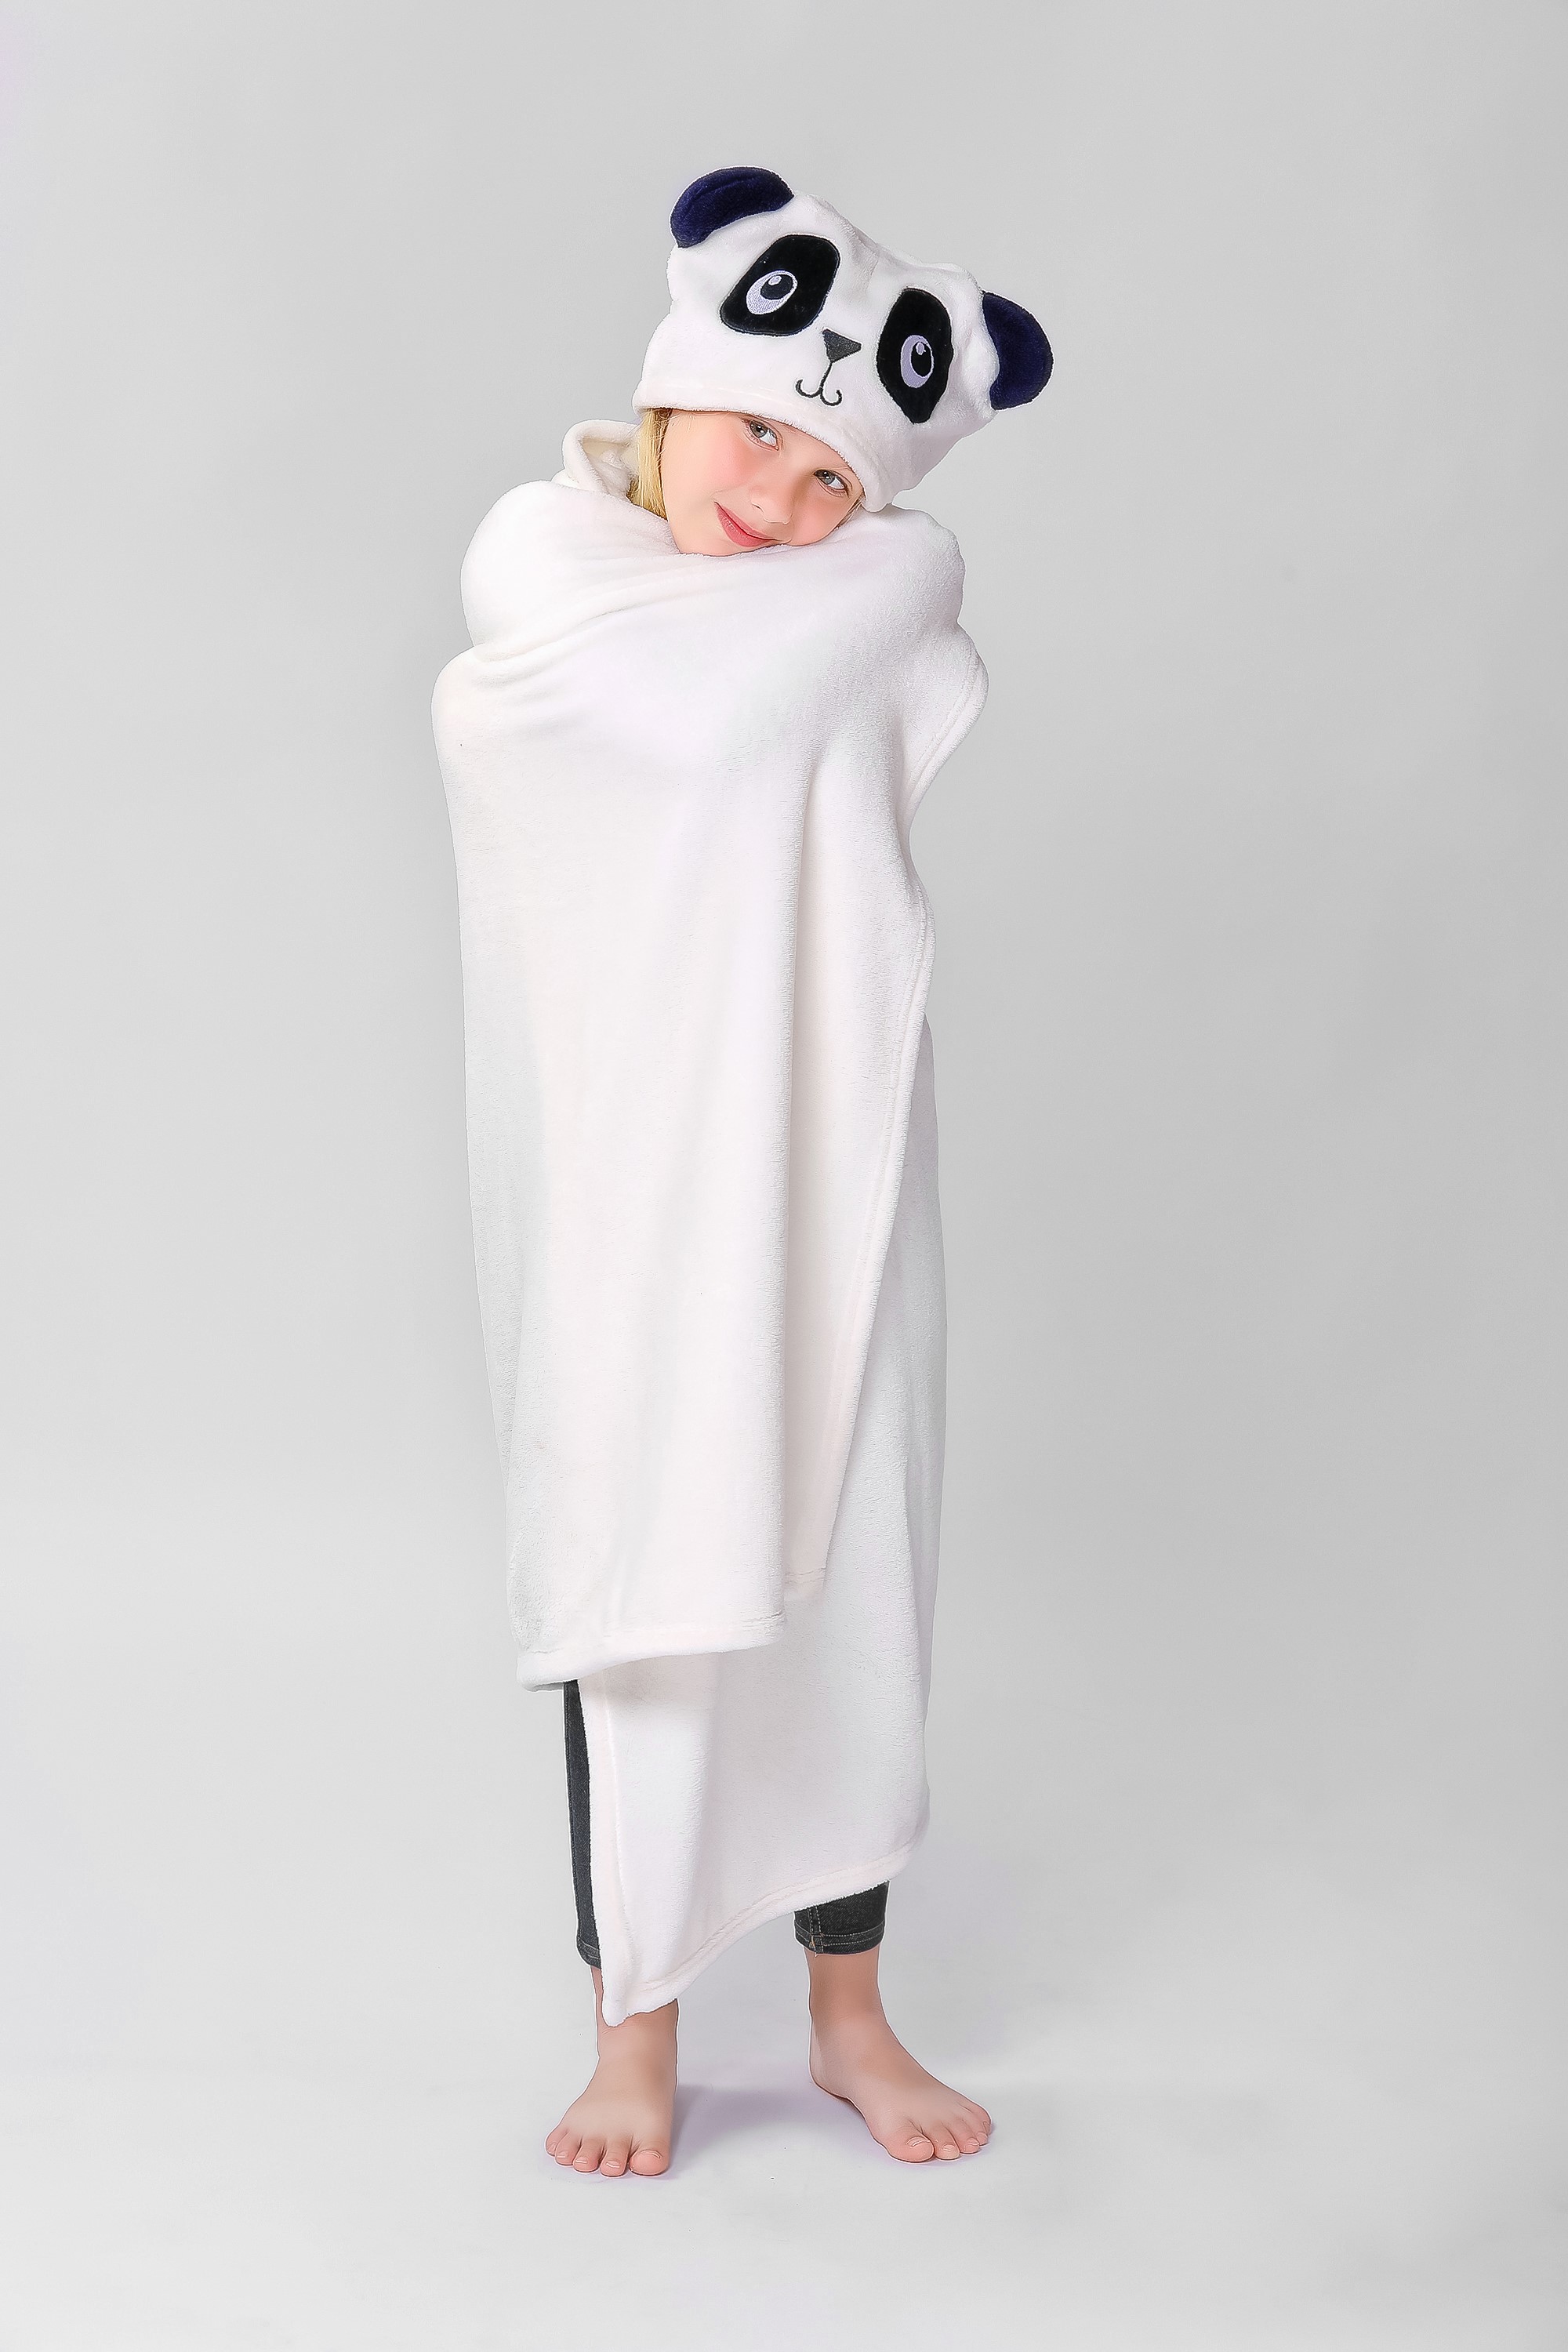 Panda Hooded Throw for Kids by Down Home - image 1 of 4